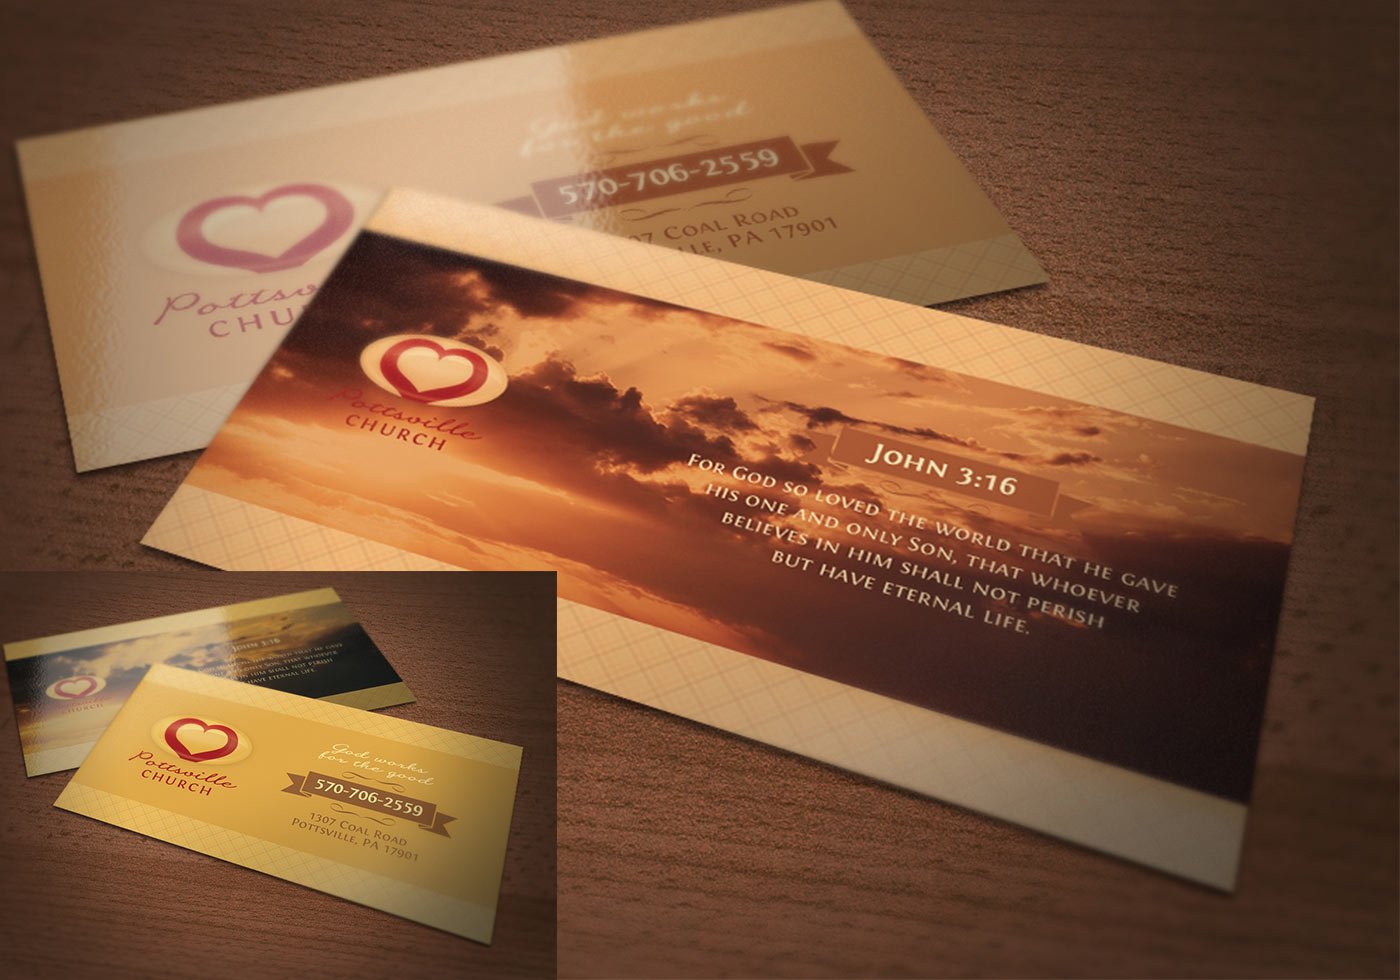 church business cards templates free 1